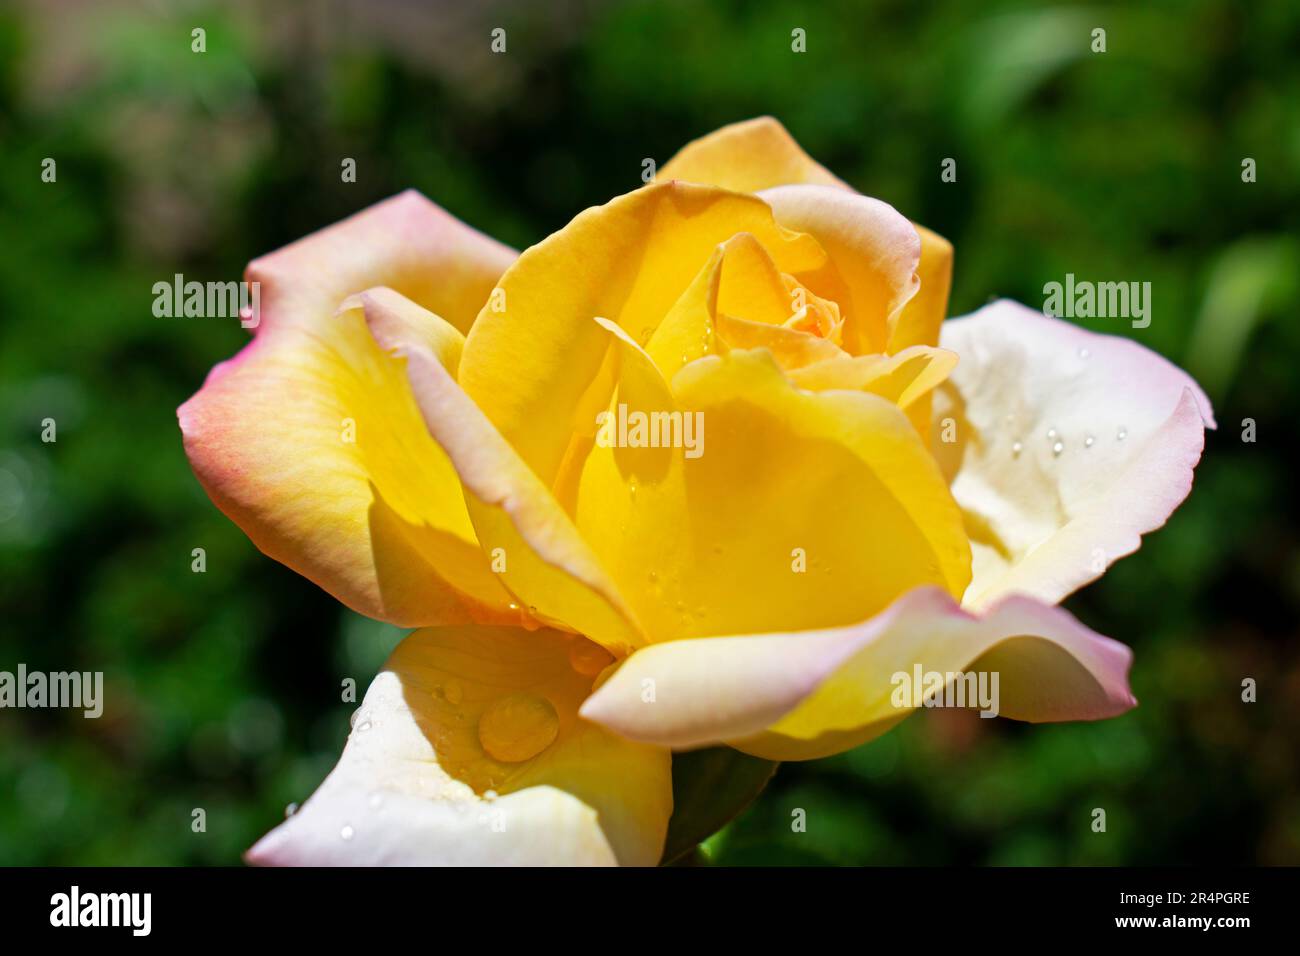 Single large yellow rose, with hints of pink on the outside petals, on a blurred green background -23 Stock Photo